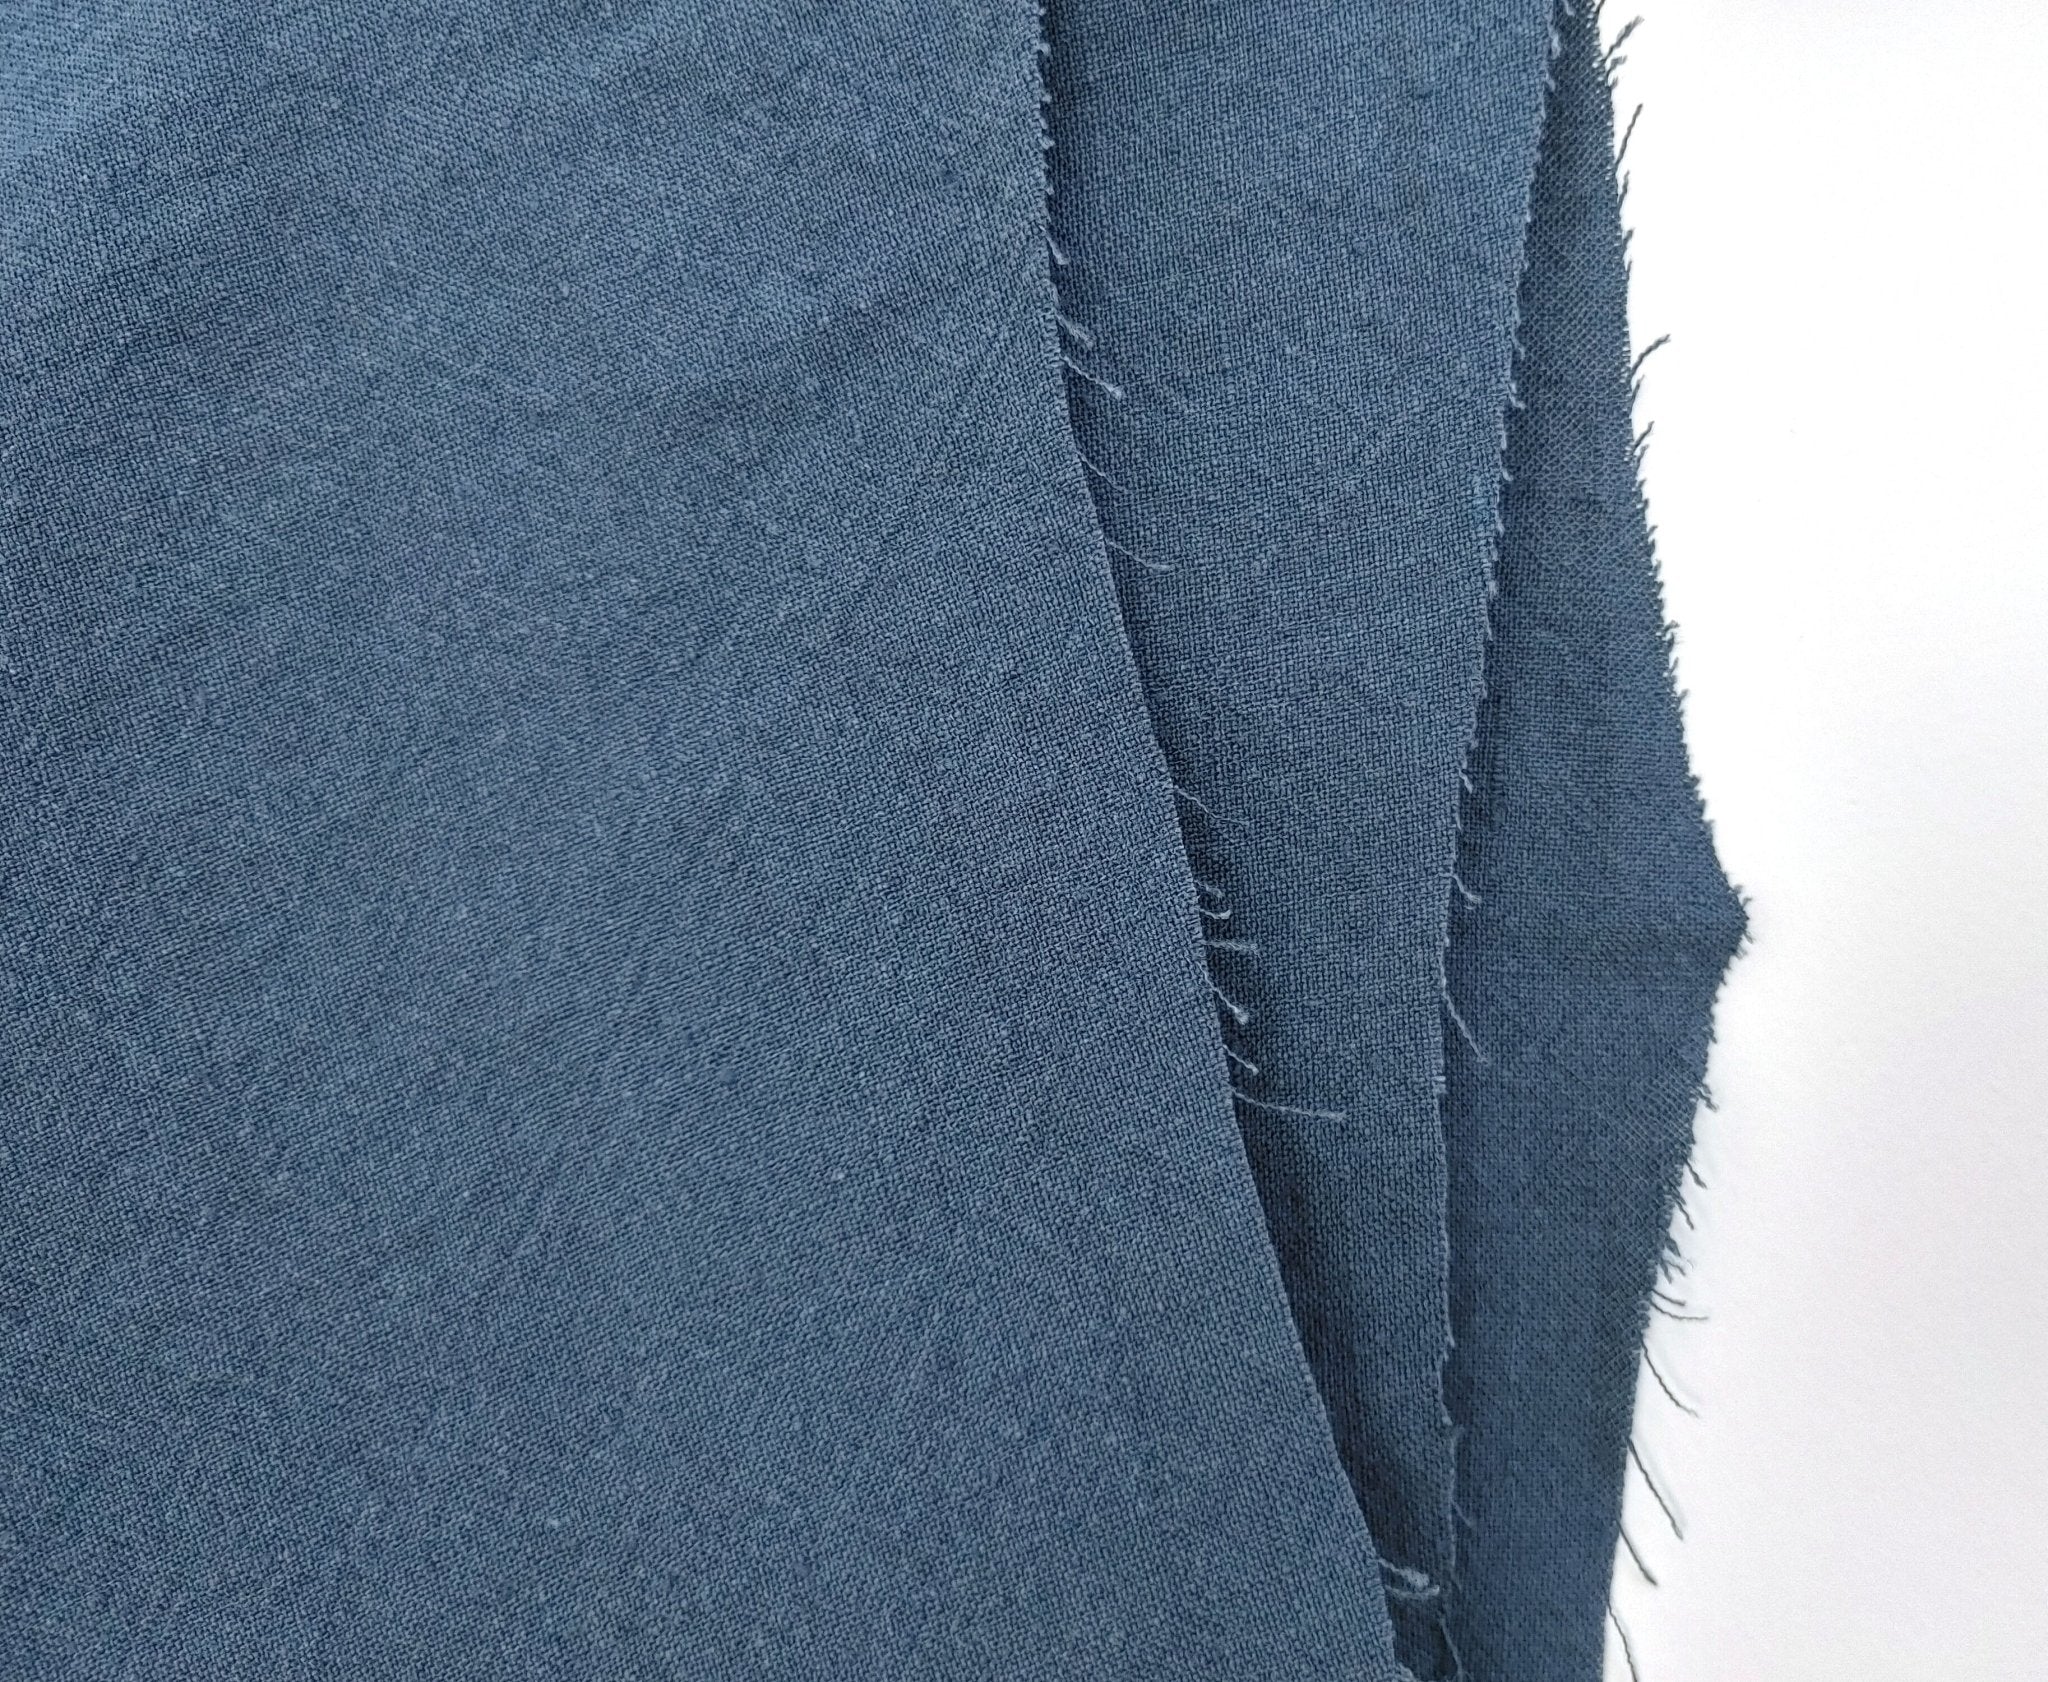 Premium 100% Linen Fabric - 9S High Twisted Yarn for Luxurious Textiles and Crafting Excellence 6772 6481 6480 - The Linen Lab - Blue